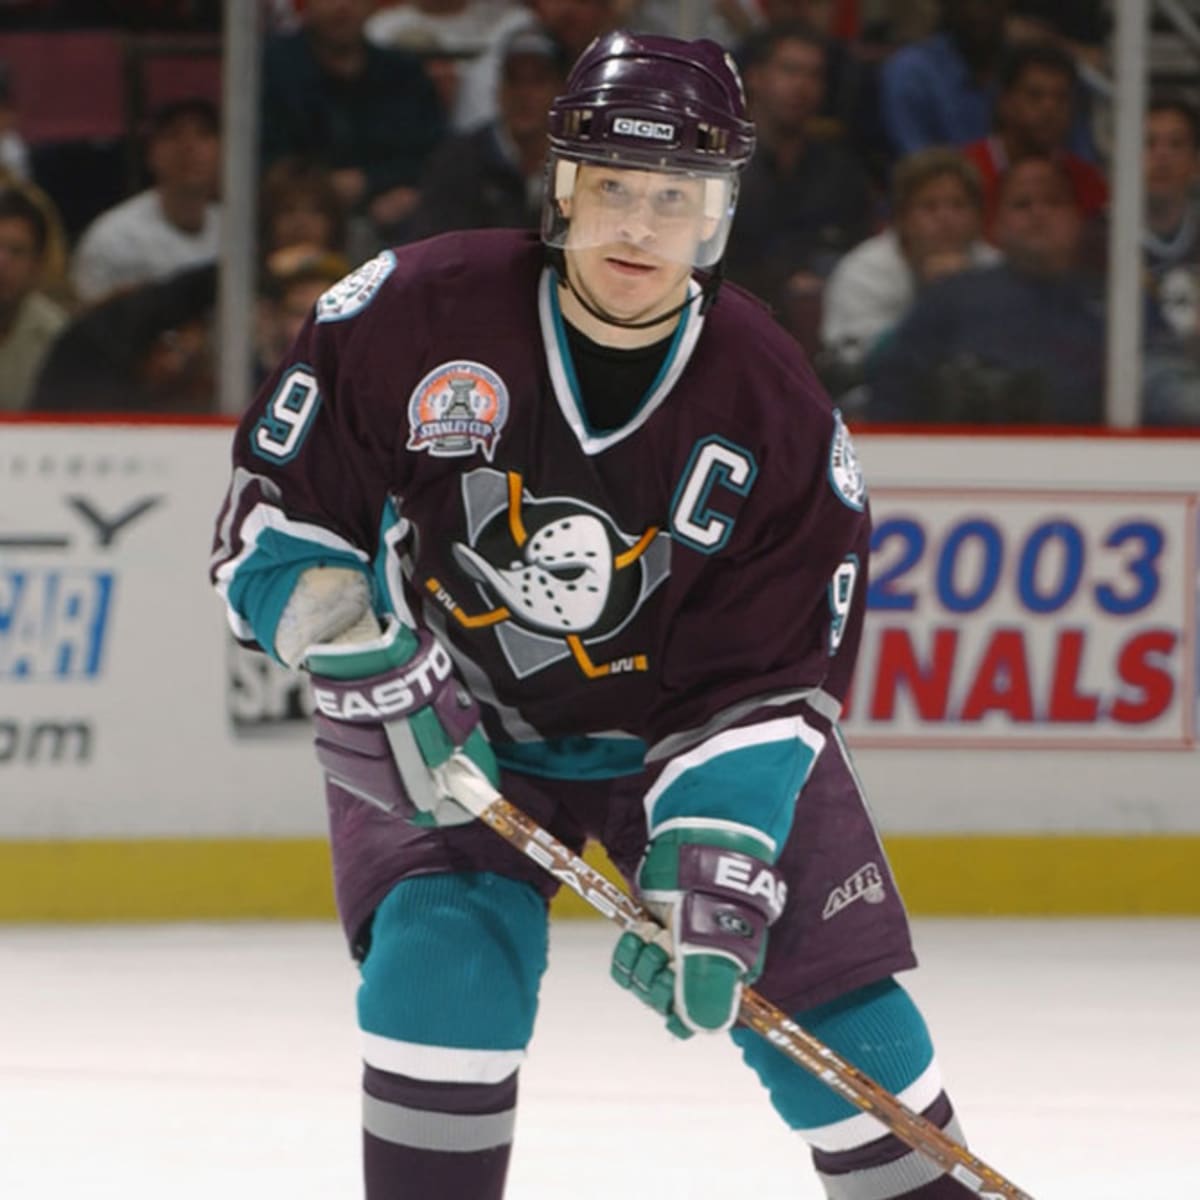 NHL99: Paul Kariya, dog on his chest, feet in water, is content